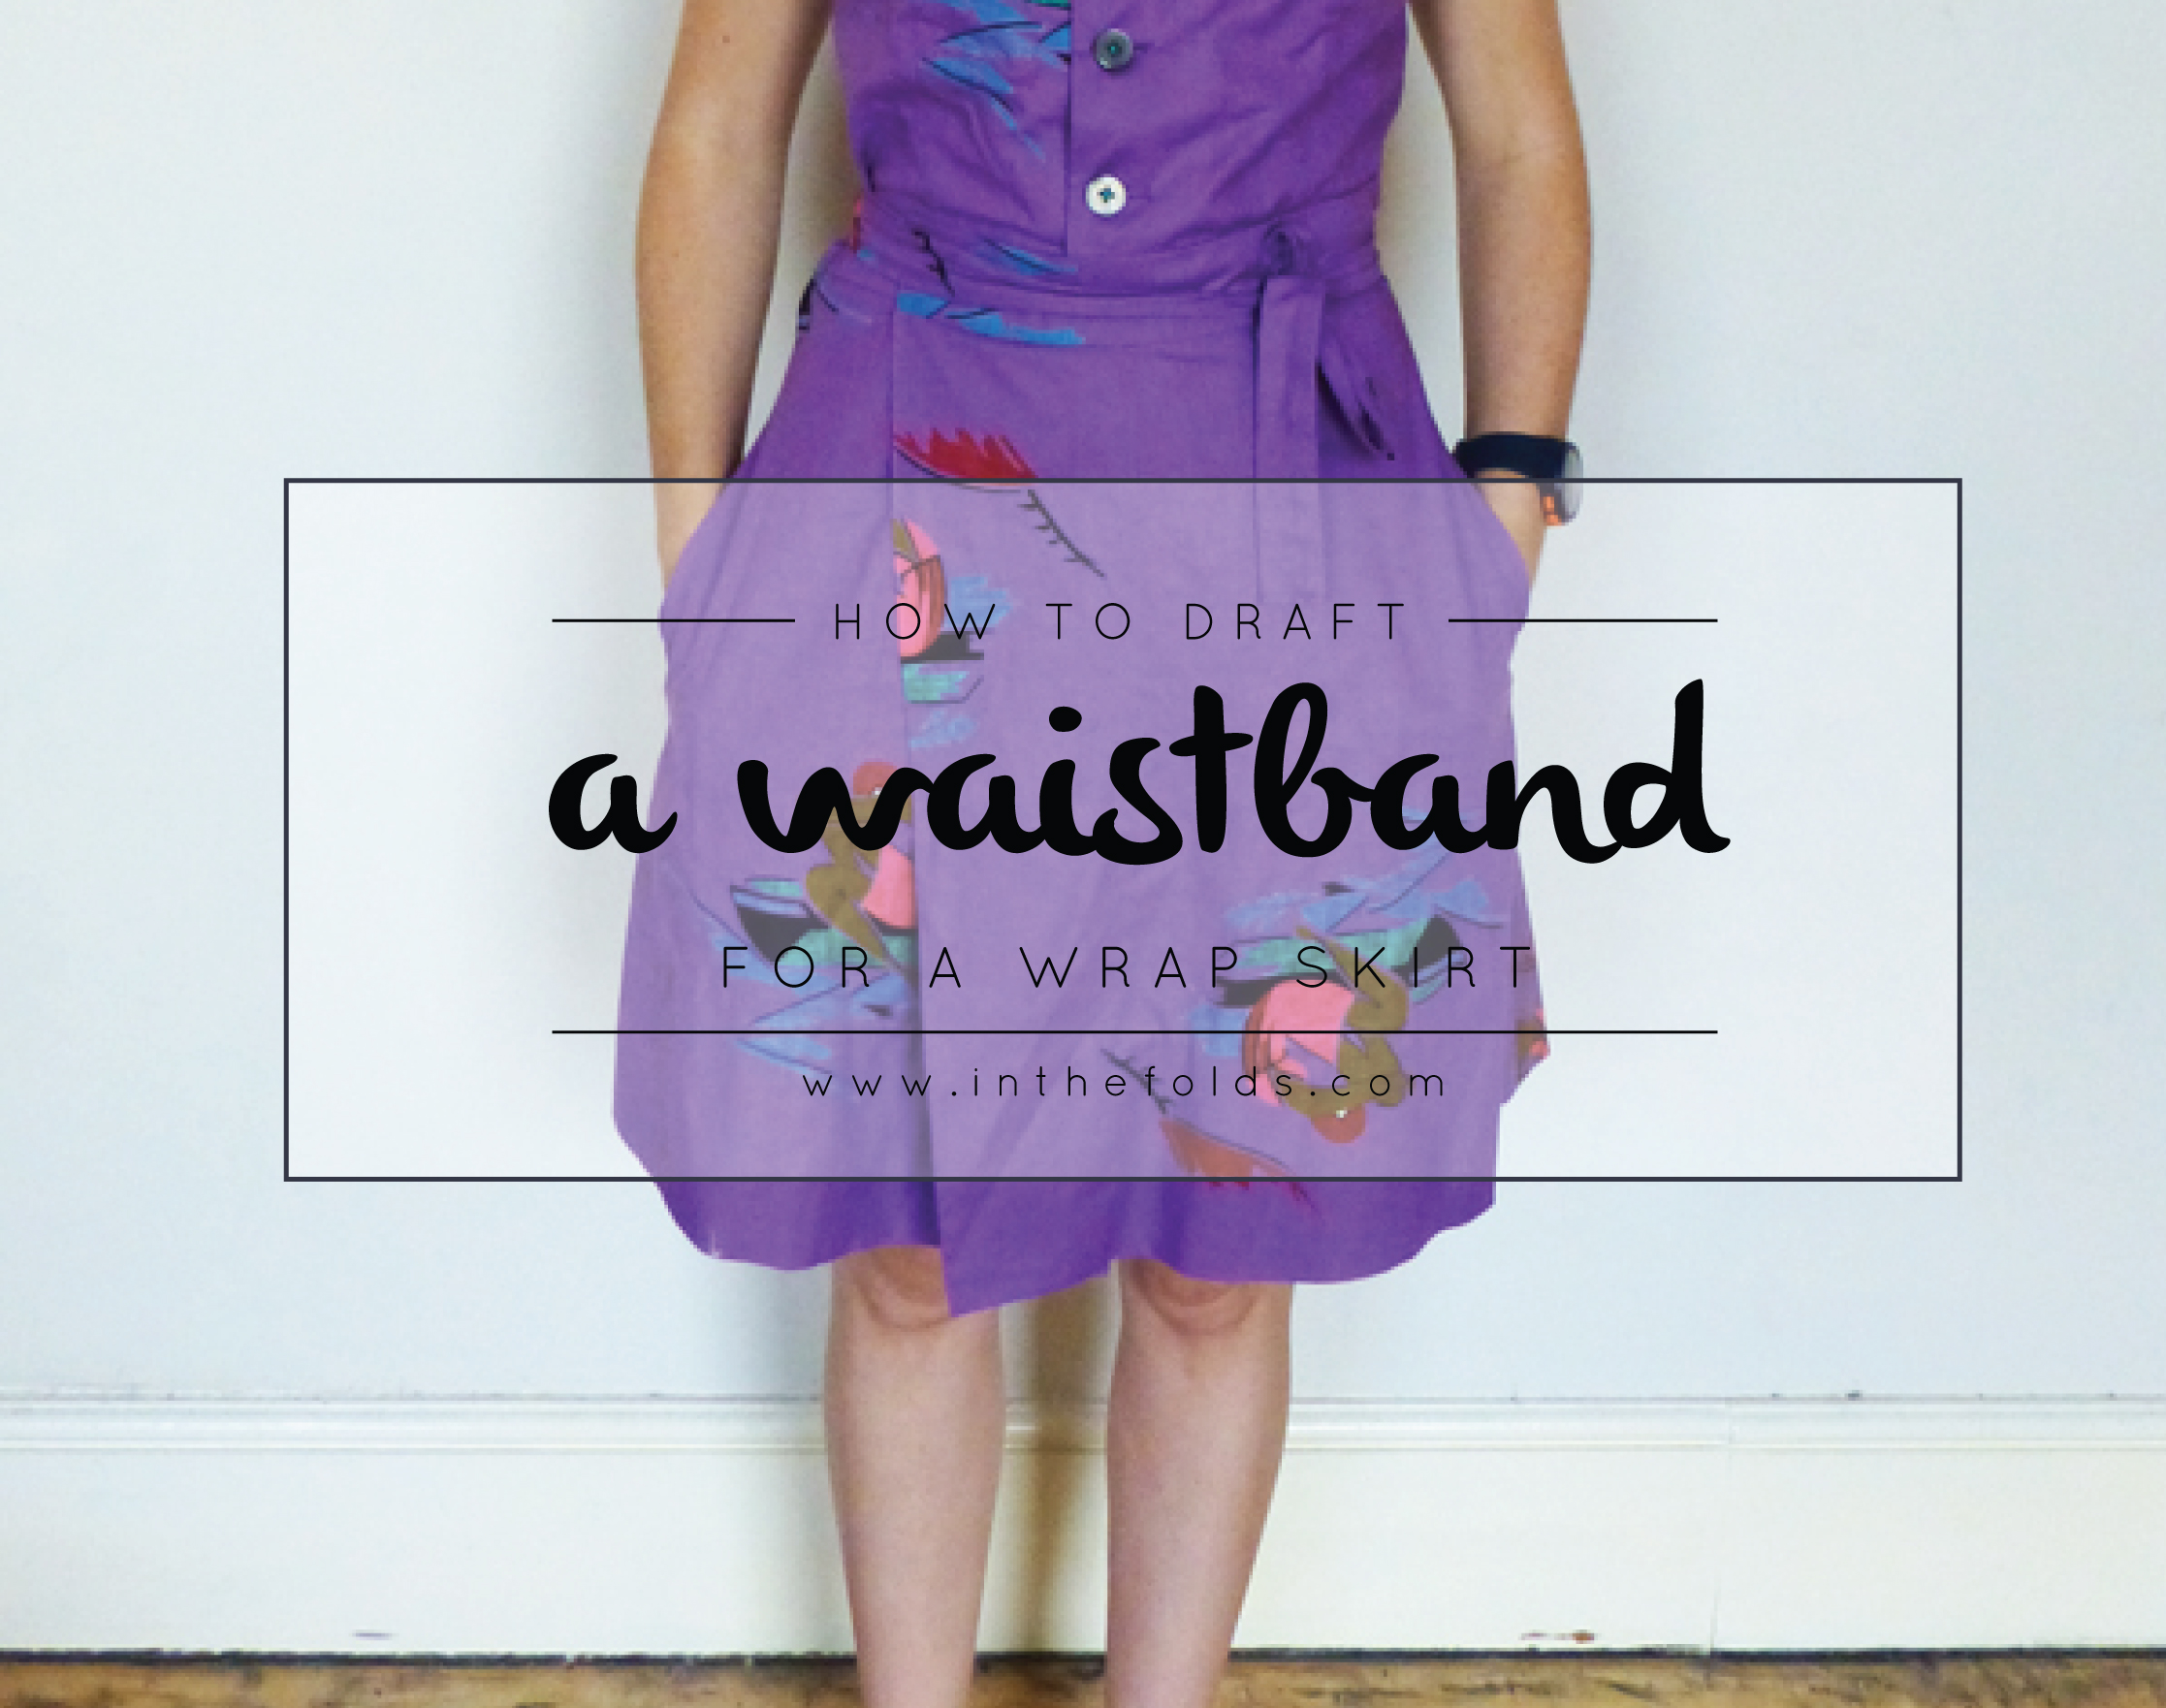 How to : Draft a waistband for a wrap skirt — In the Folds